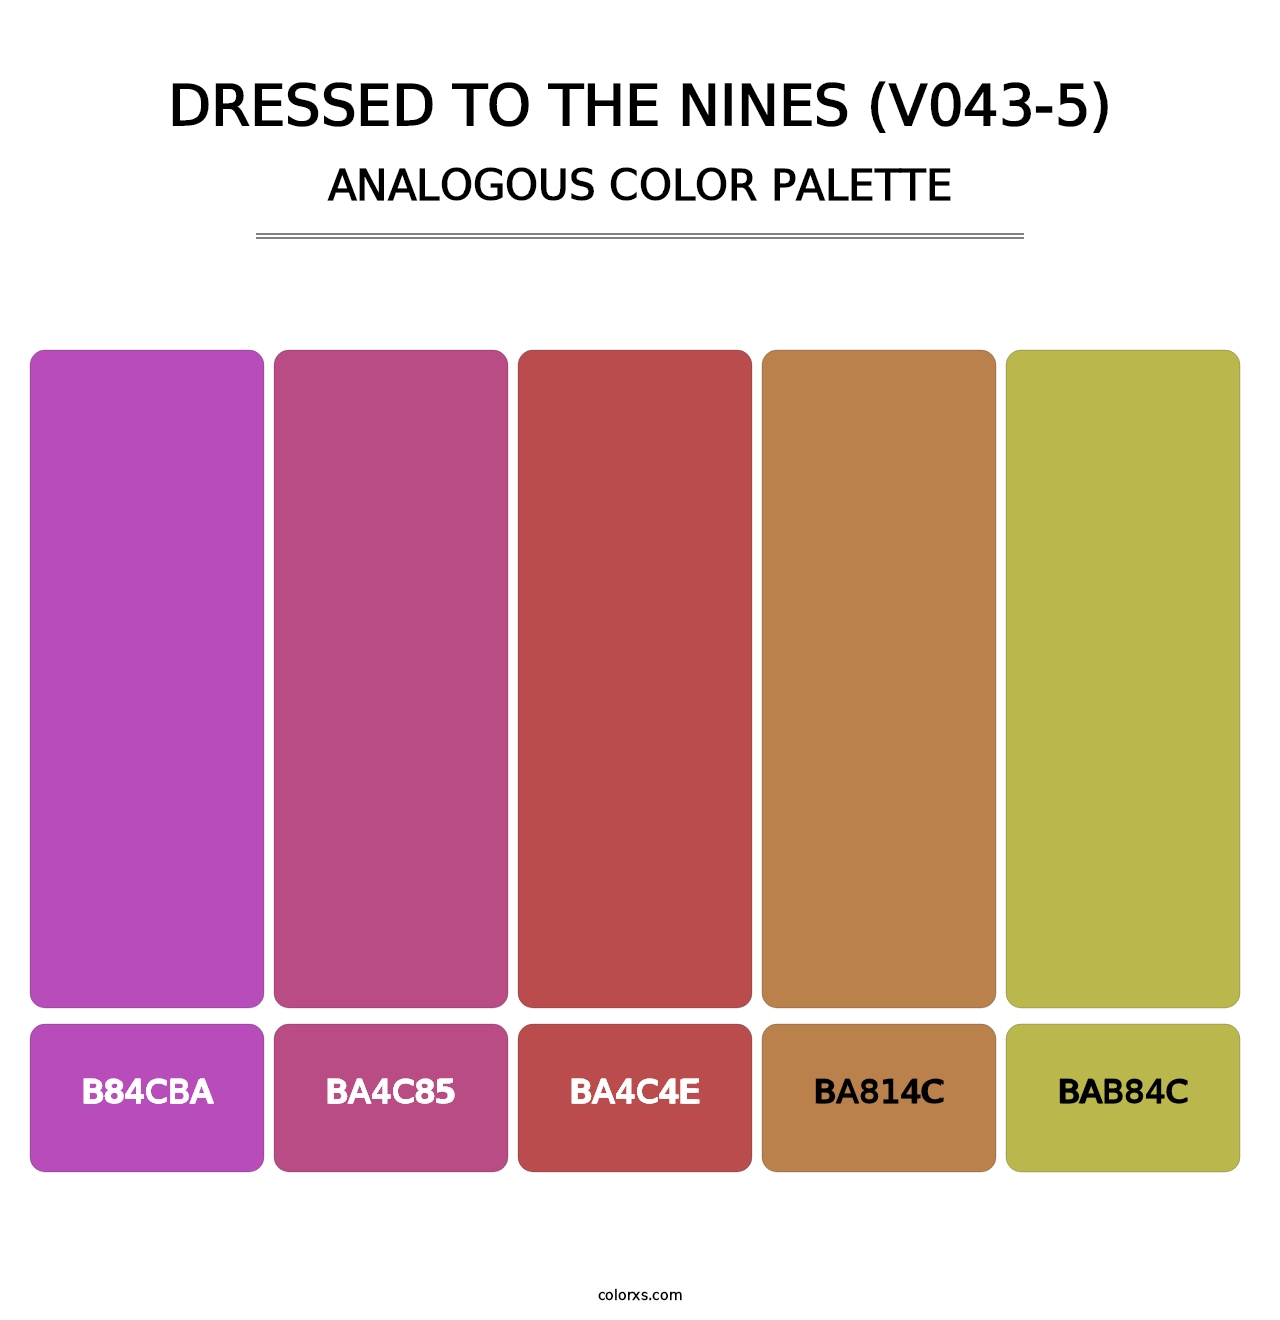 Dressed to the Nines (V043-5) - Analogous Color Palette